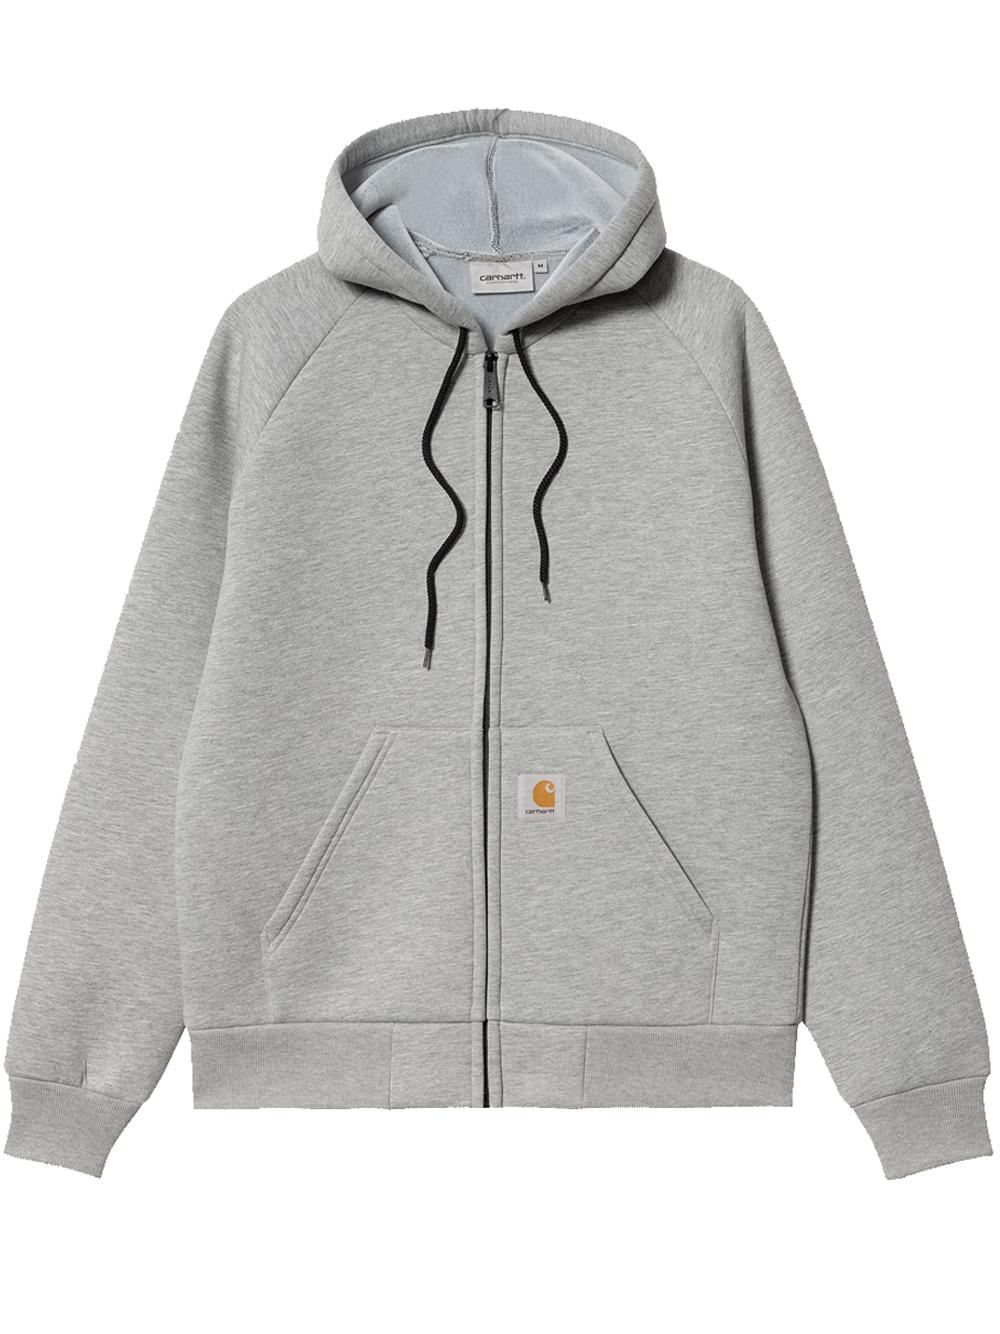 Carhartt WIP Car Lux Jacket Gray In Cotton for Men | Lyst